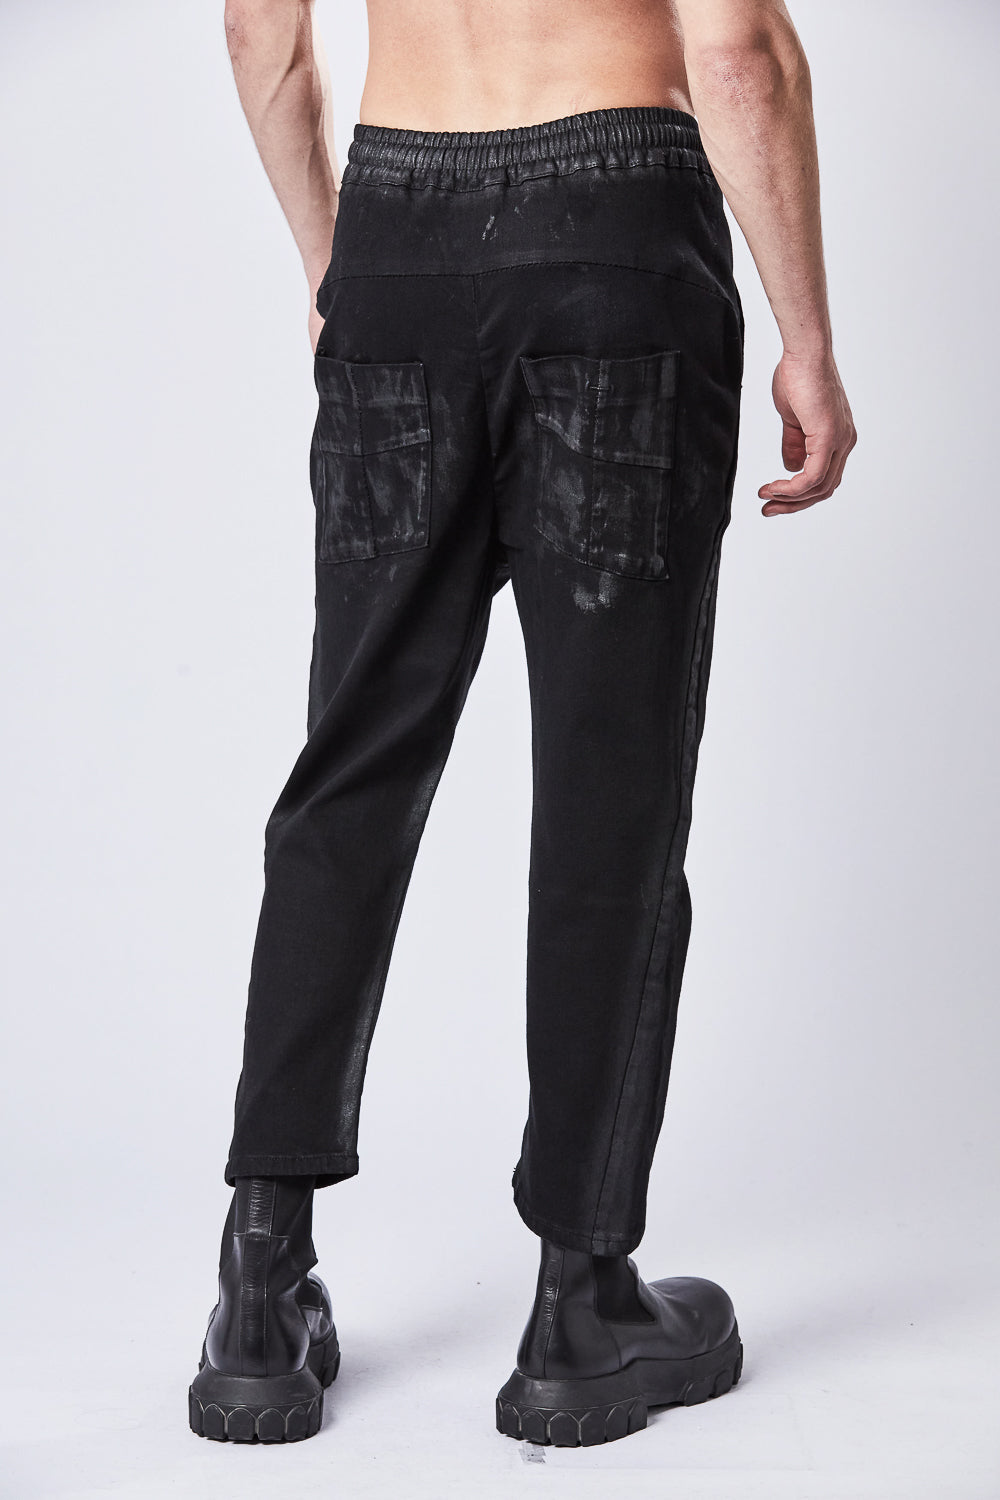 Buy the Thom Krom M T 87 Jean in Black at Intro. Spend £50 for free UK delivery. Official stockists. We ship worldwide.